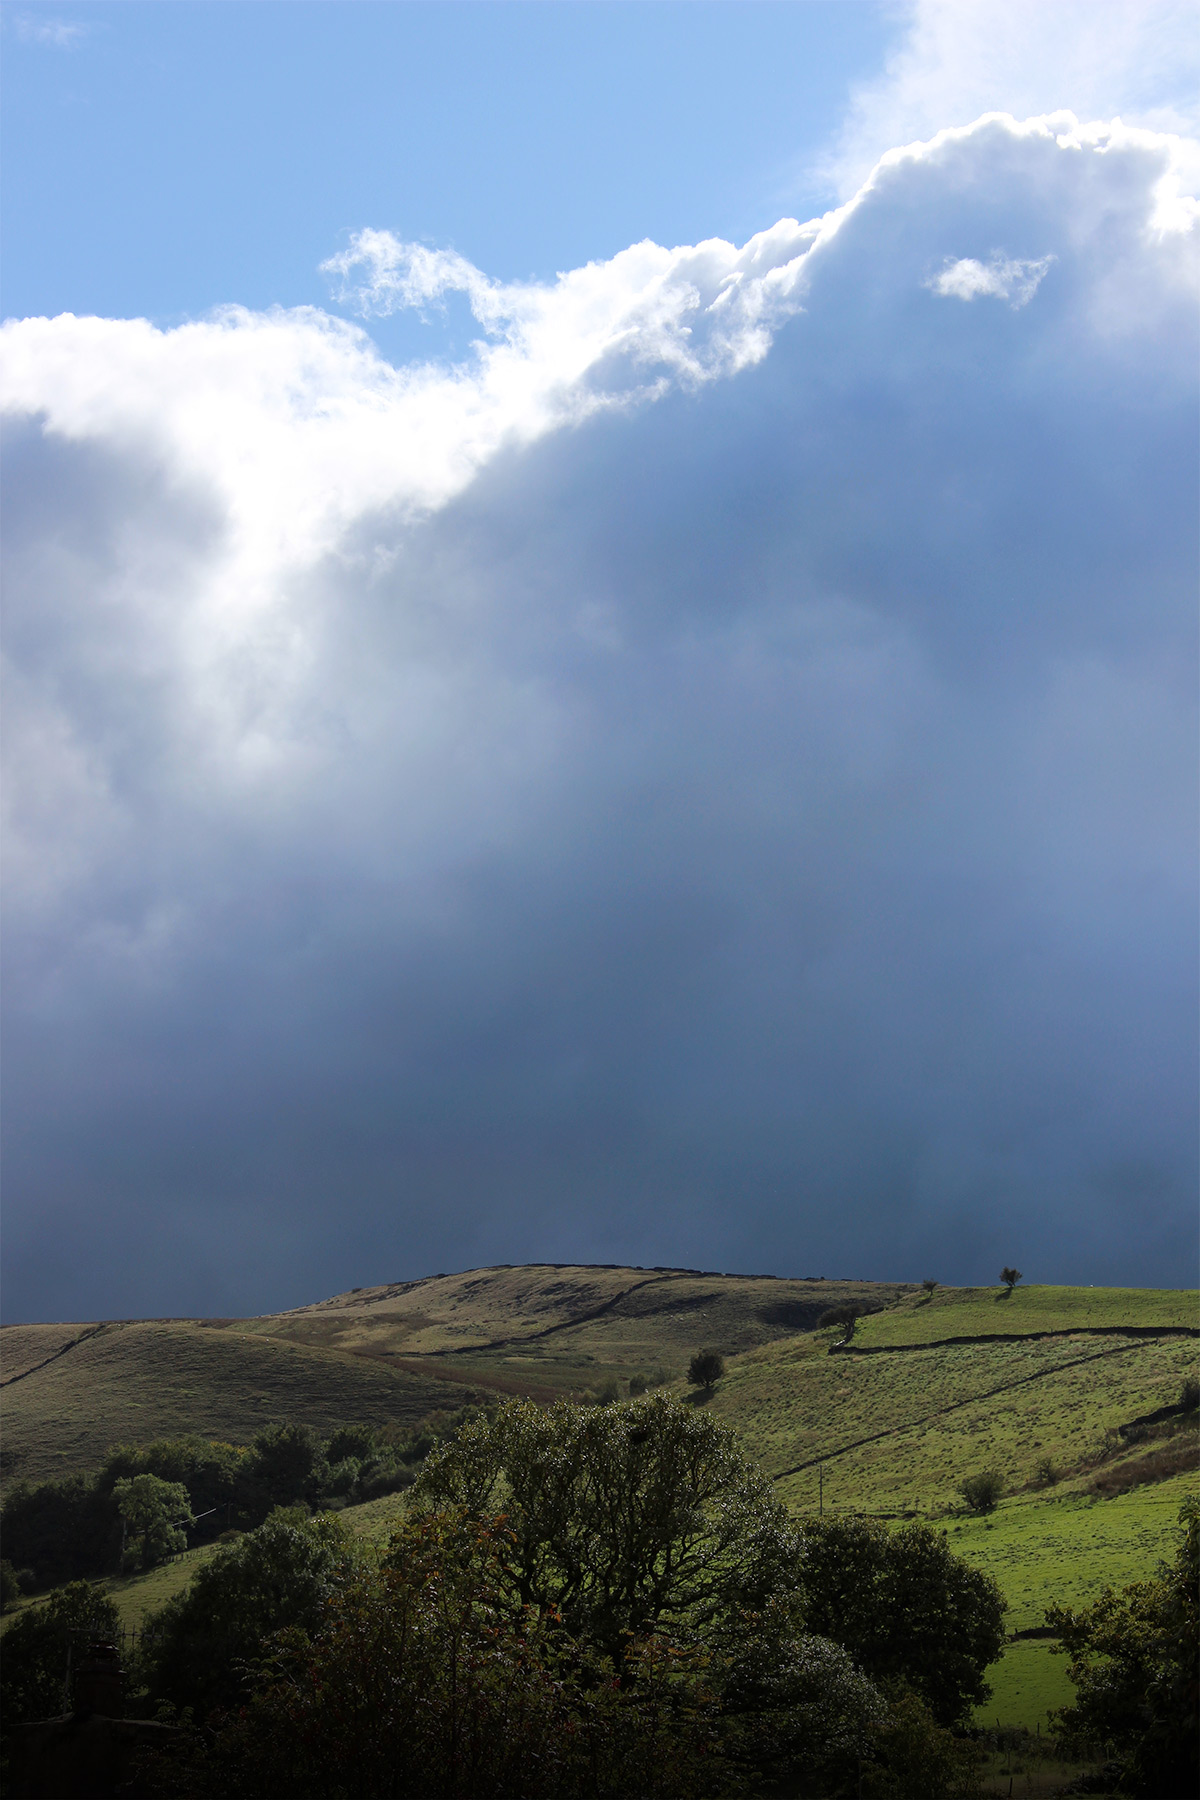 Phoside Moody Sky - Photo of a dramatic sky over Phoside in the Peak District - photo by gavstretchy